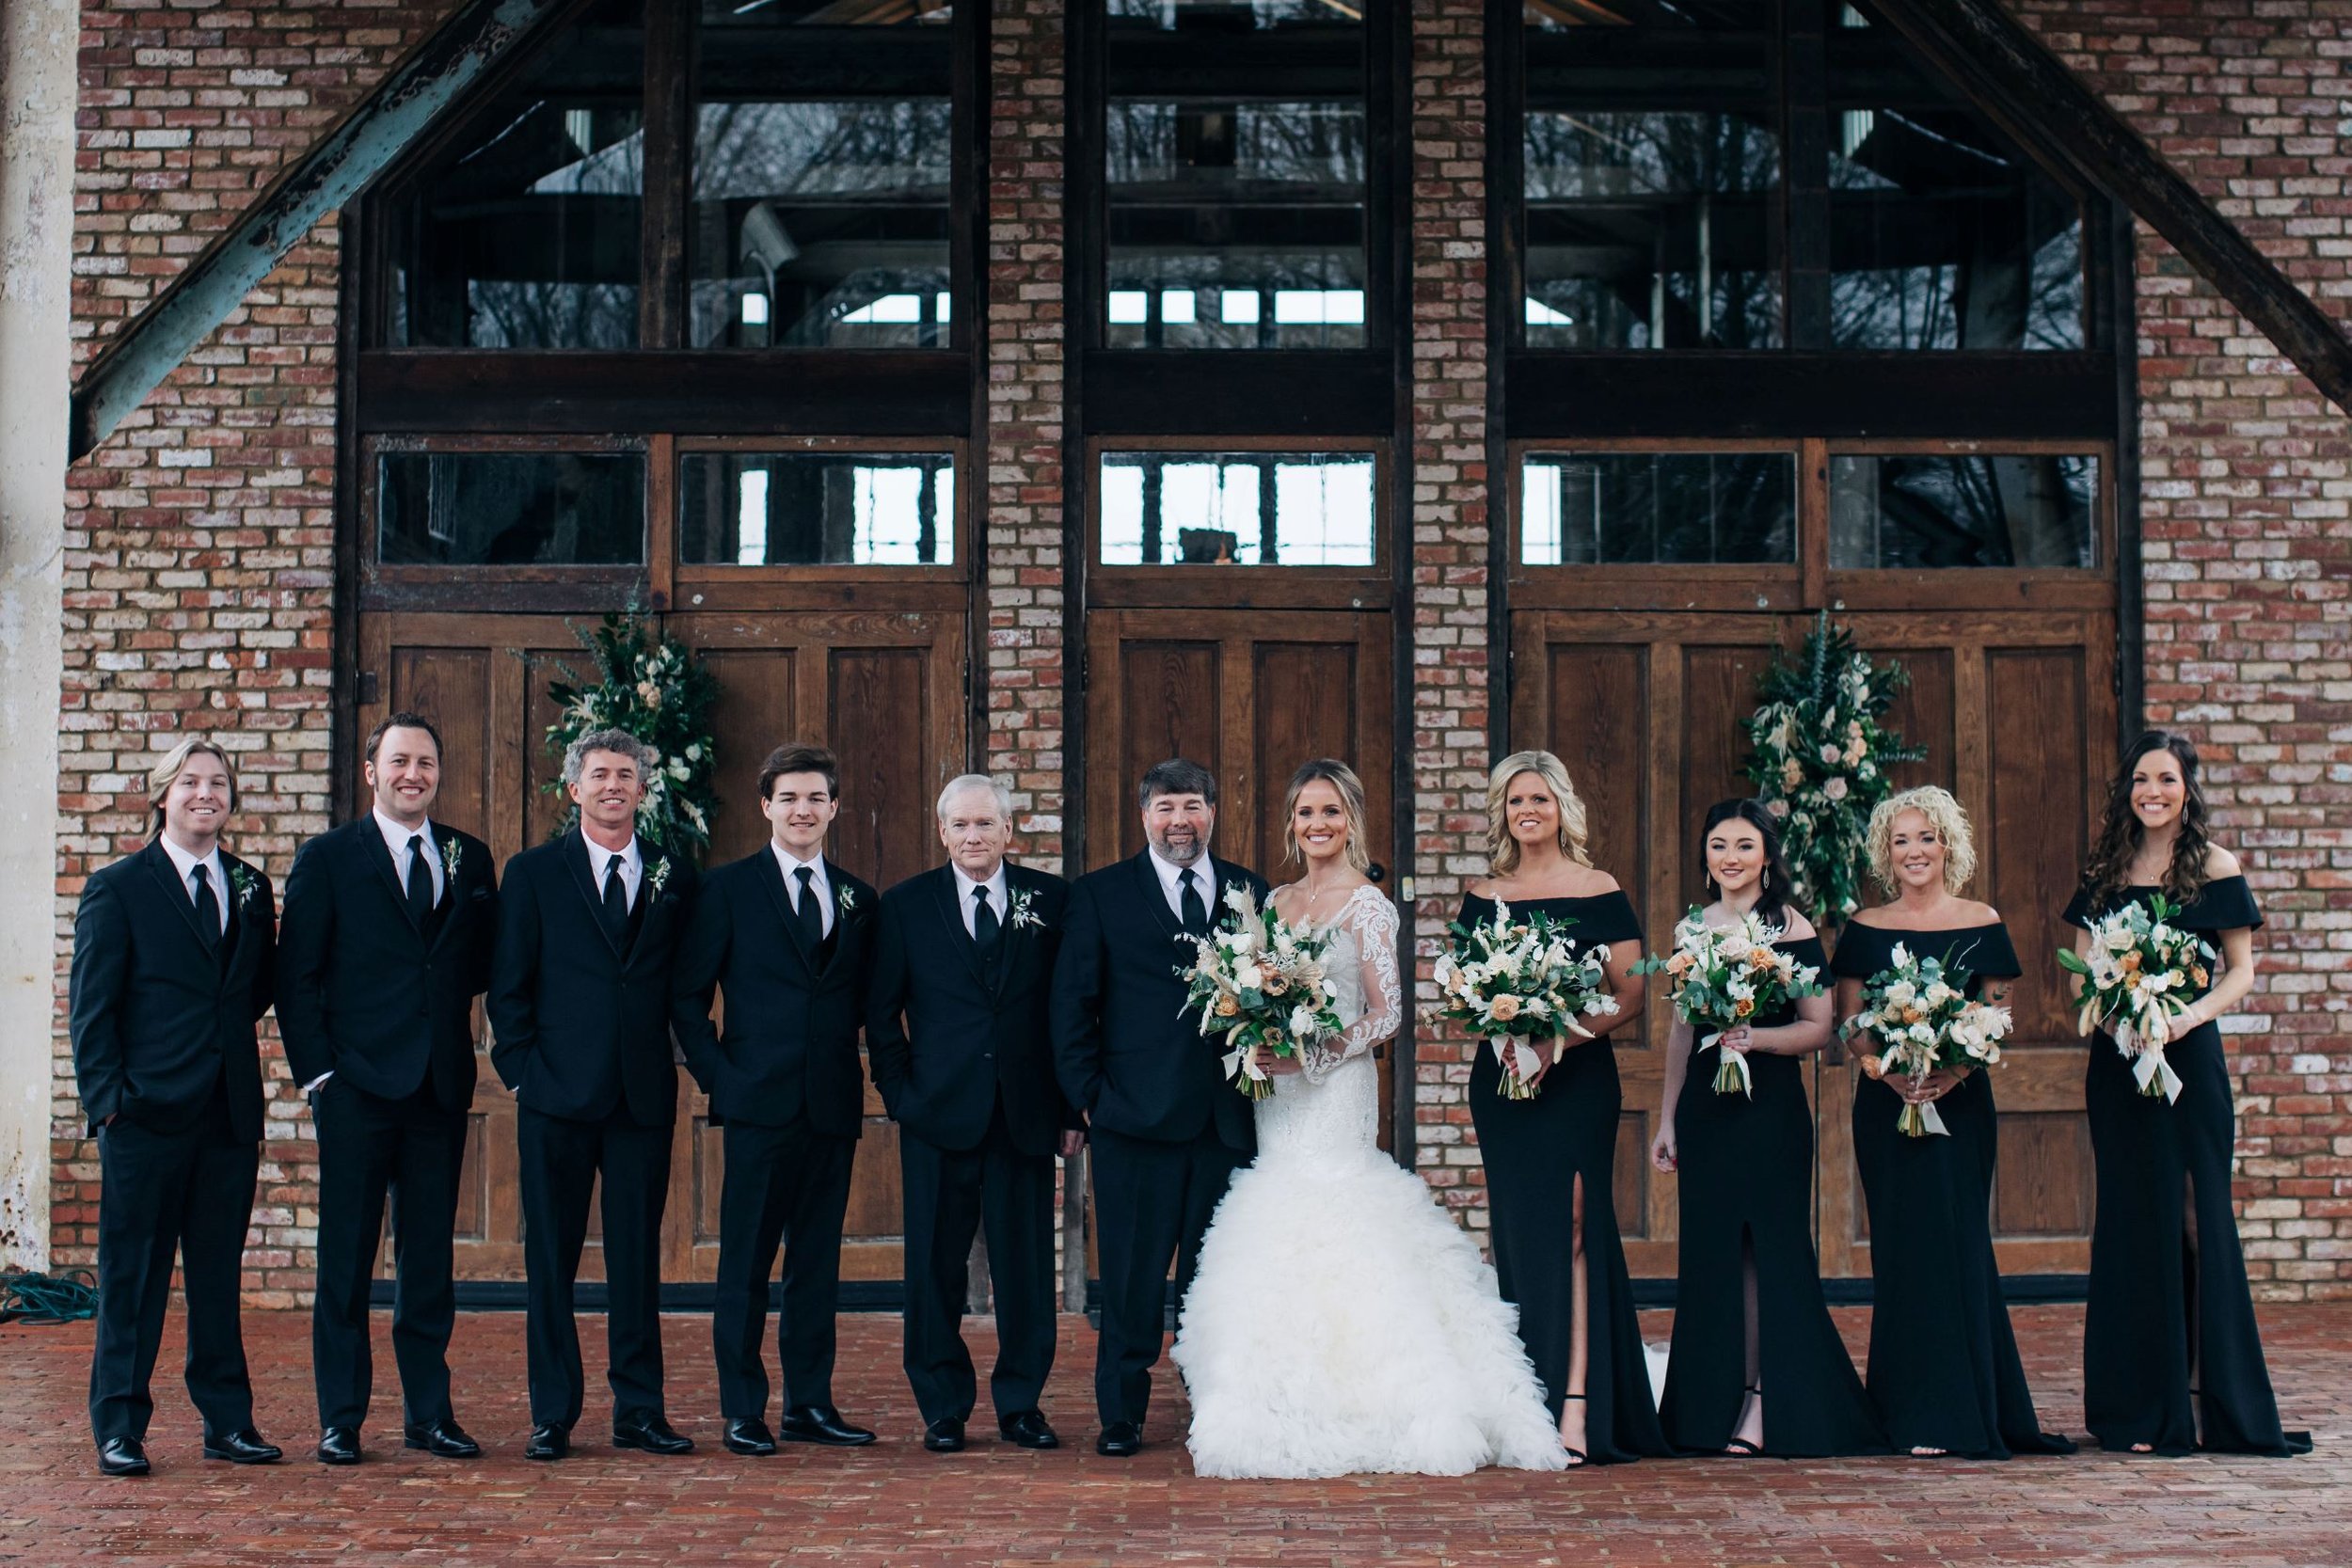 H-bride-groom-bridal-party-the-jefferson-unzicker-McArthur-wedding-taylor-square-photography0513_1F7A6151.jpg